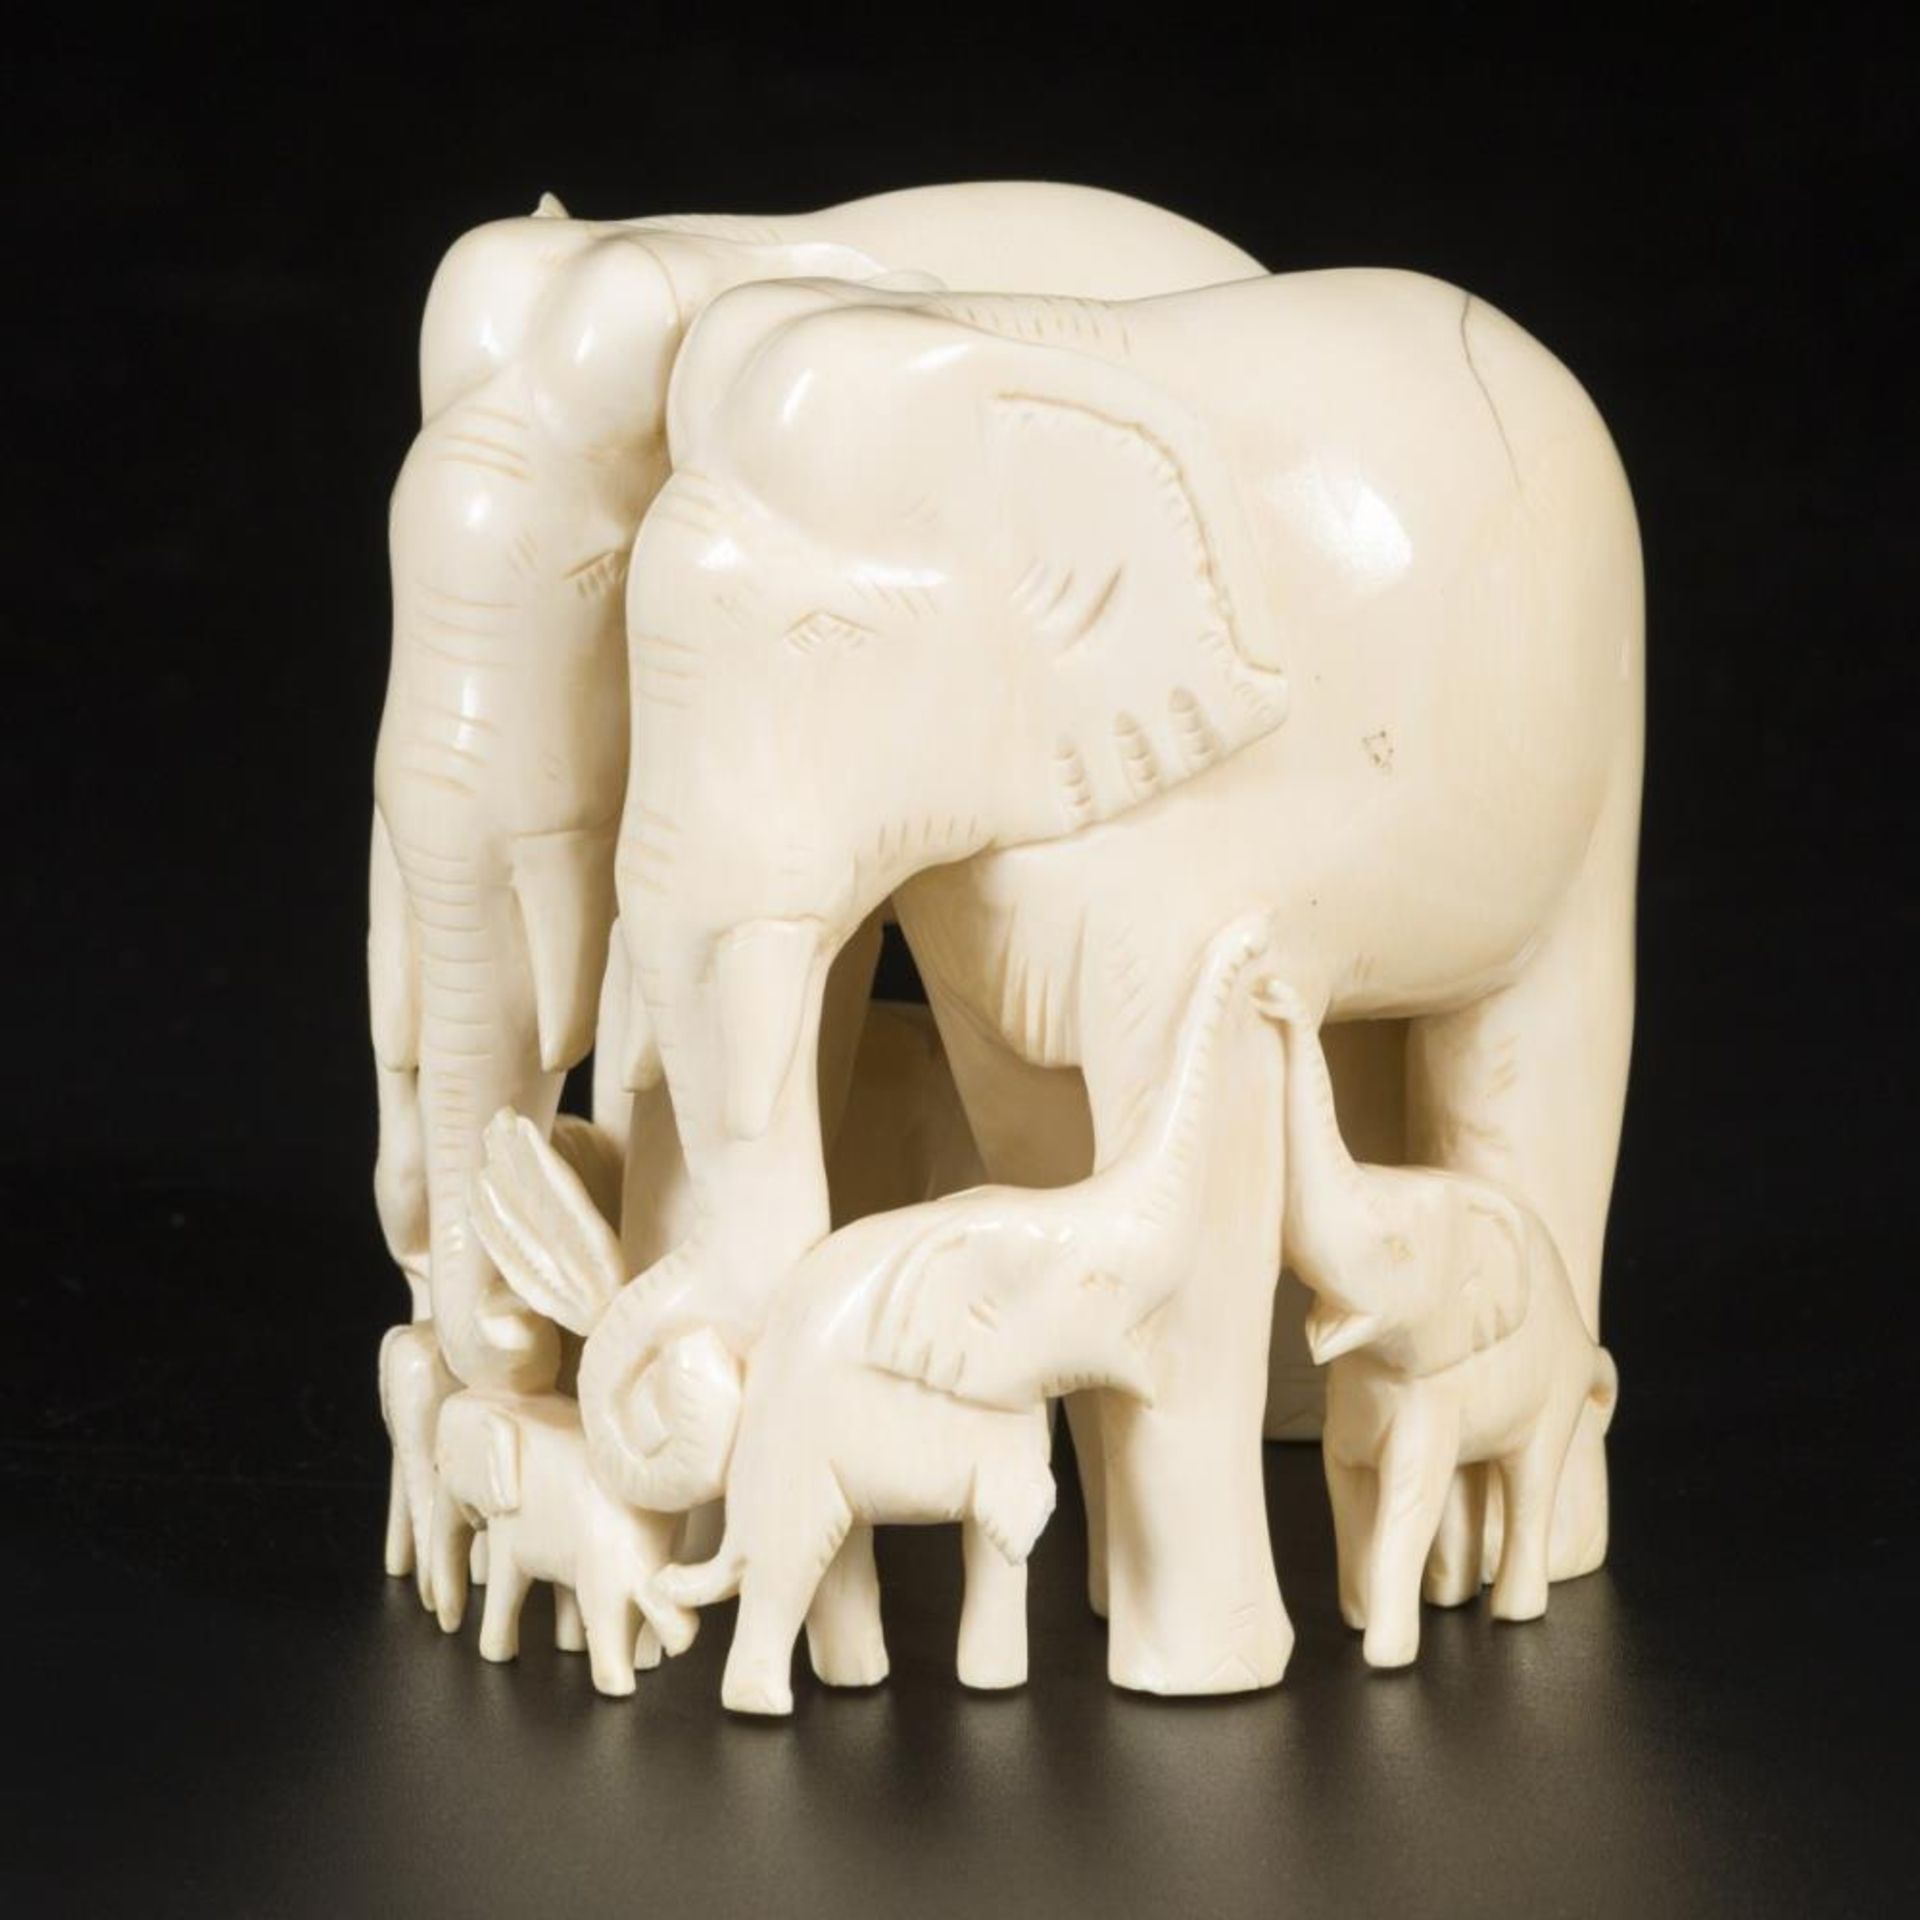 An ivory carving depicting a group of elephants, DRC, ca. 1920/30.